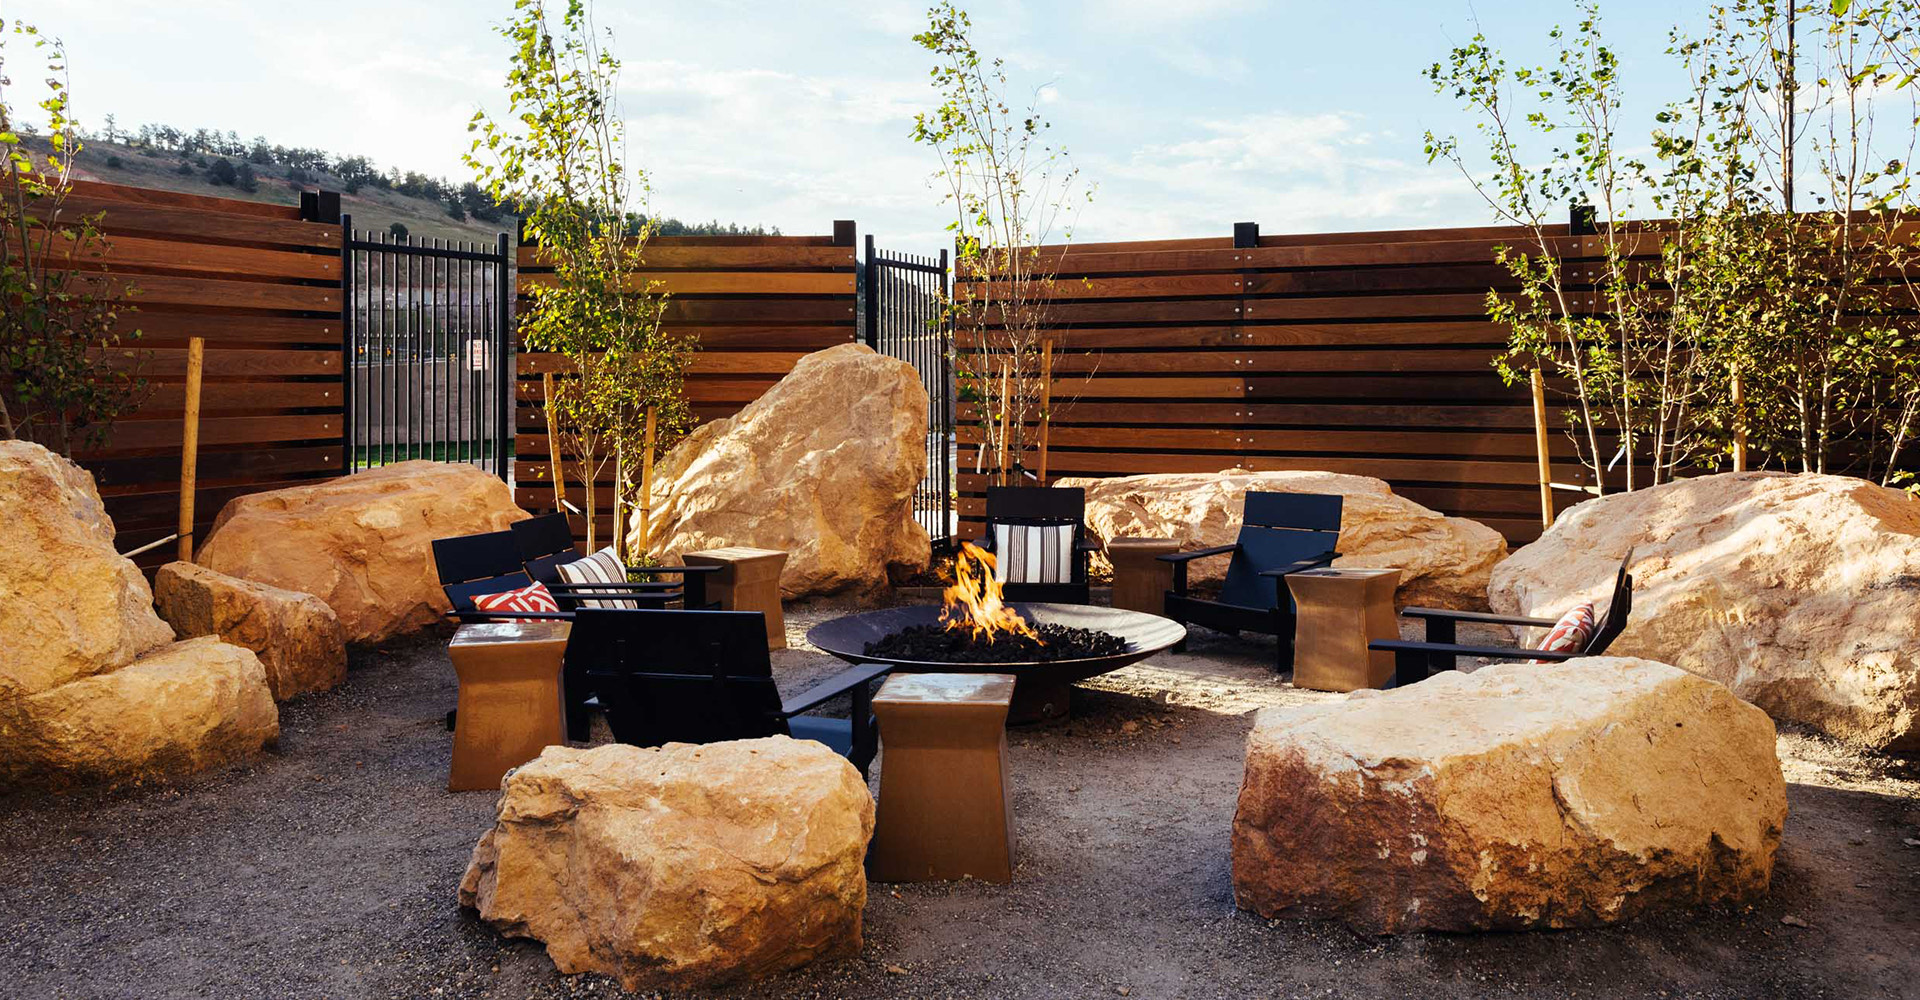 Outside lounge area with a fire pit in the middle and rocks surrounding